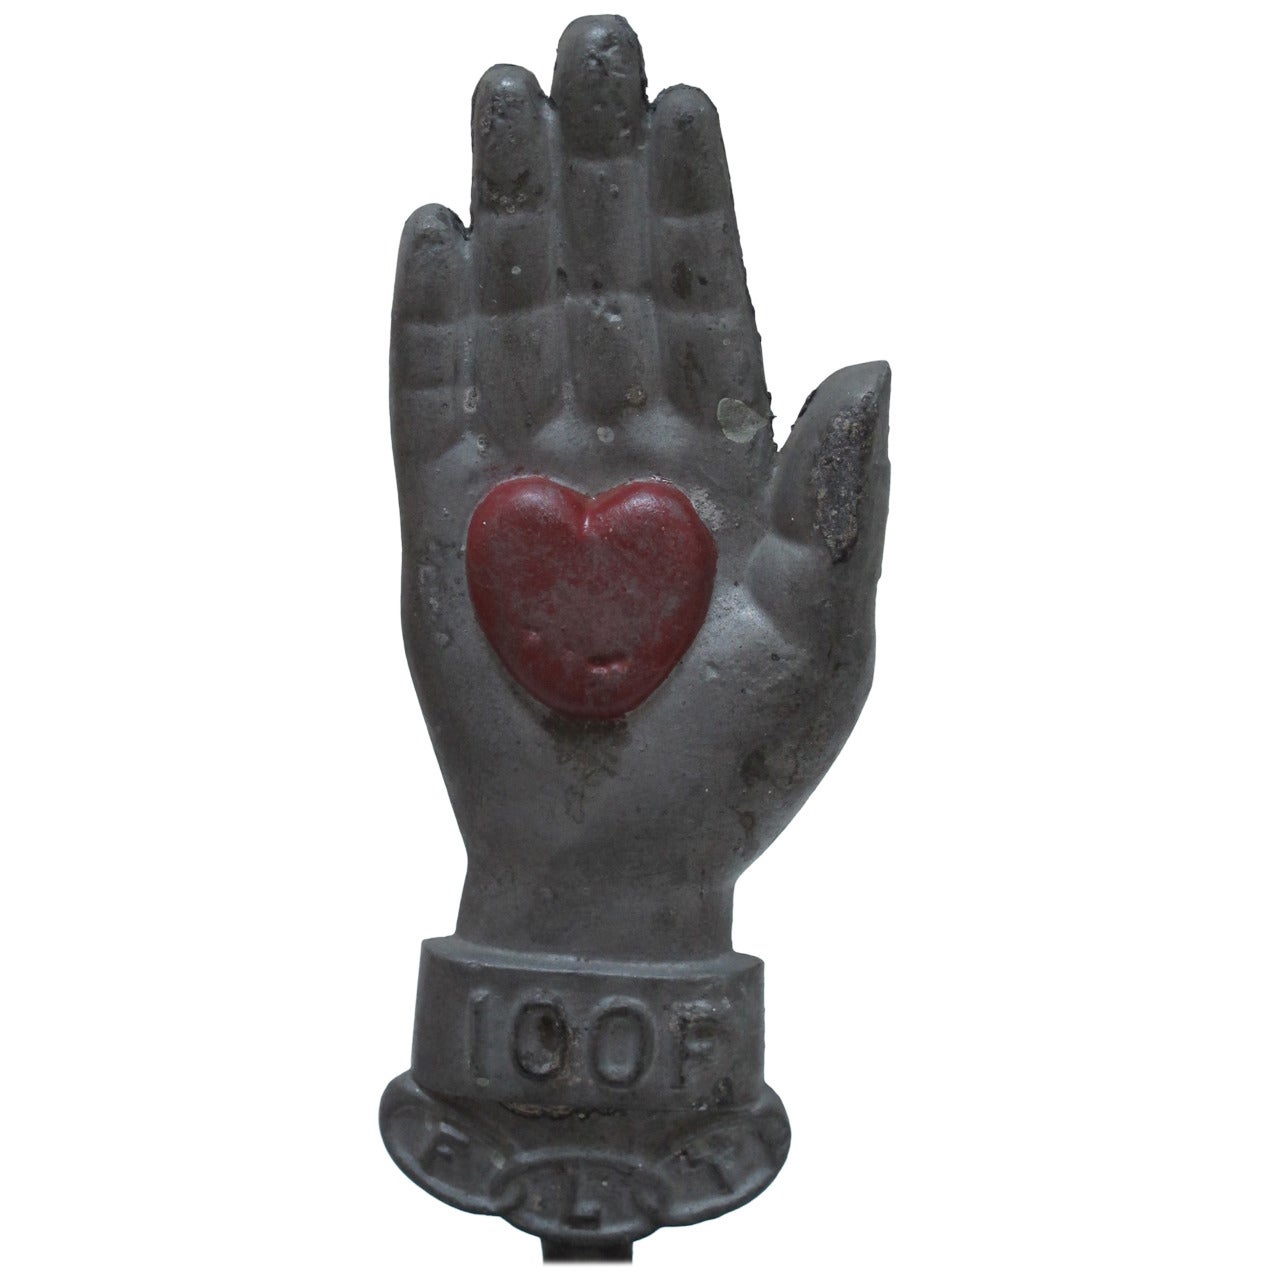 Painted Iron Heart in Hand Sculpture